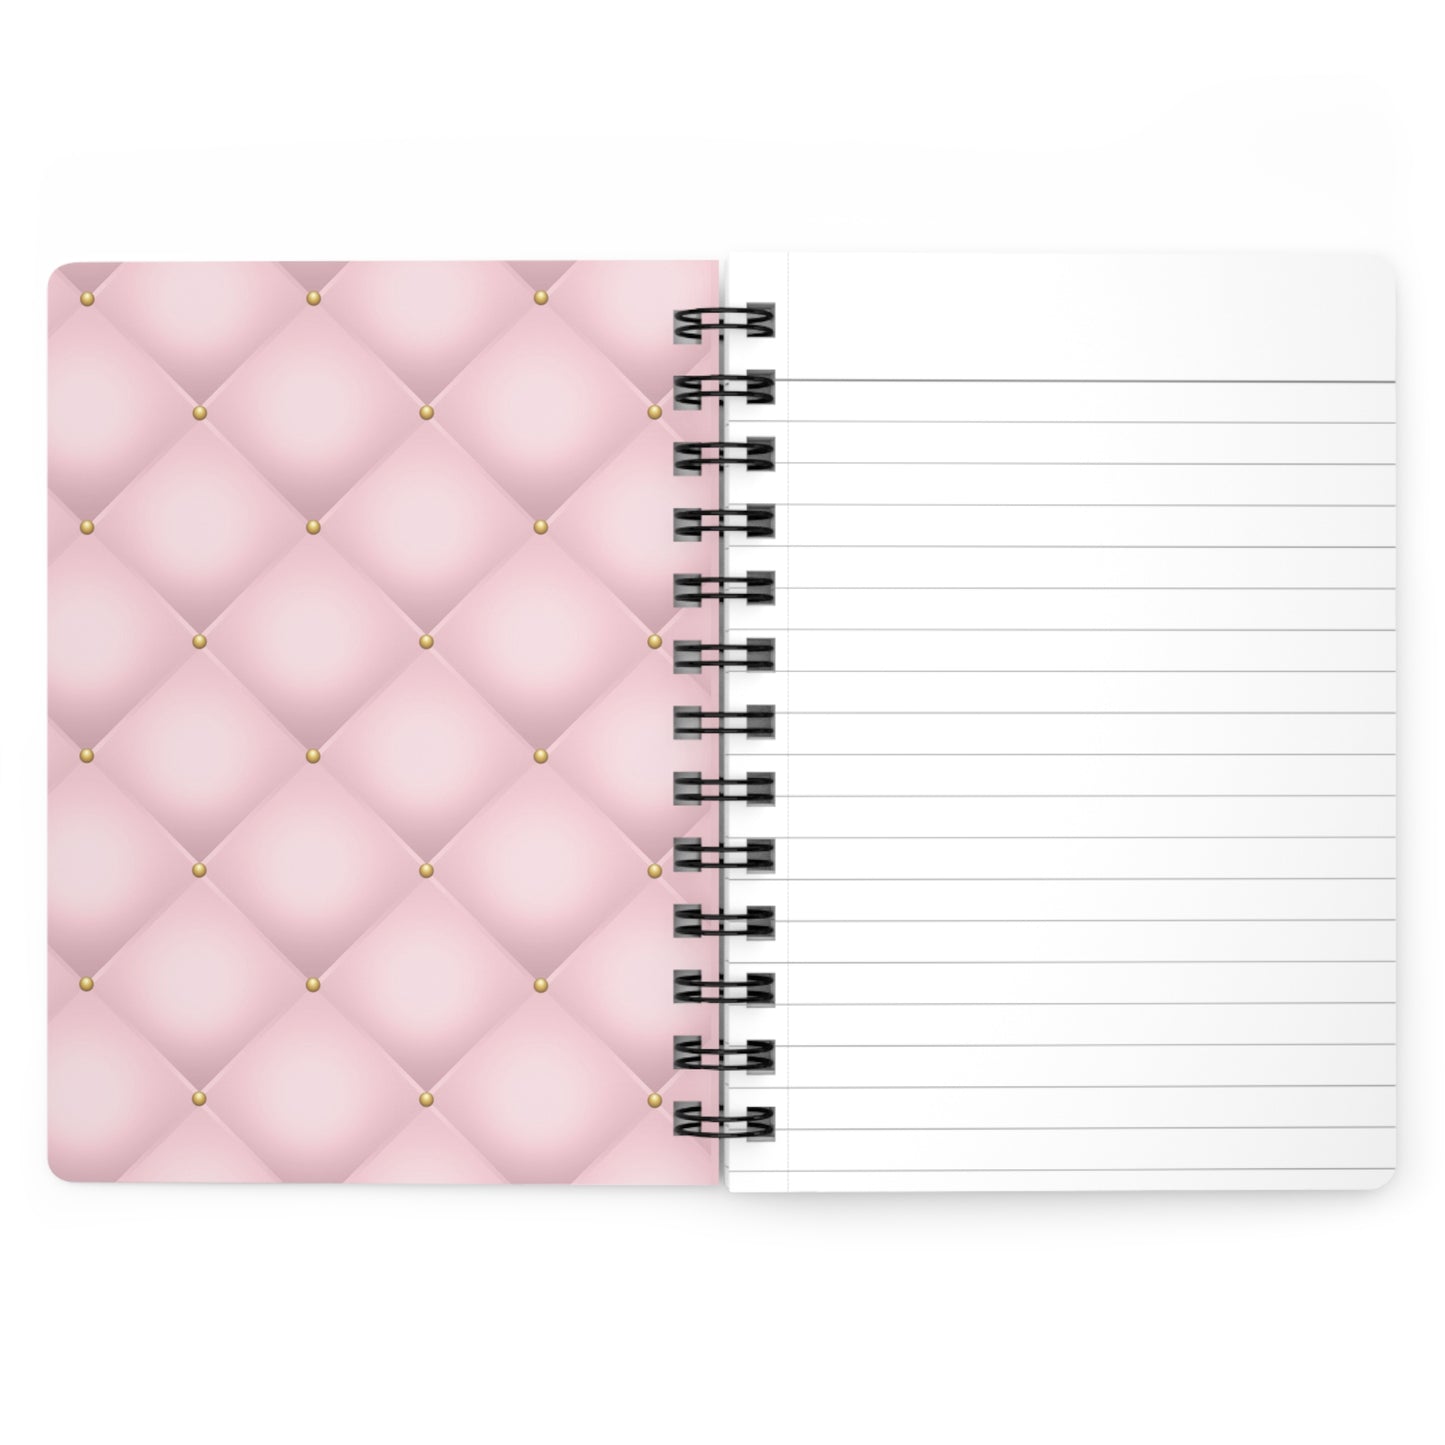 Stop for one minute Tufted Print Light Pink and Gold Spiral Bound Journal